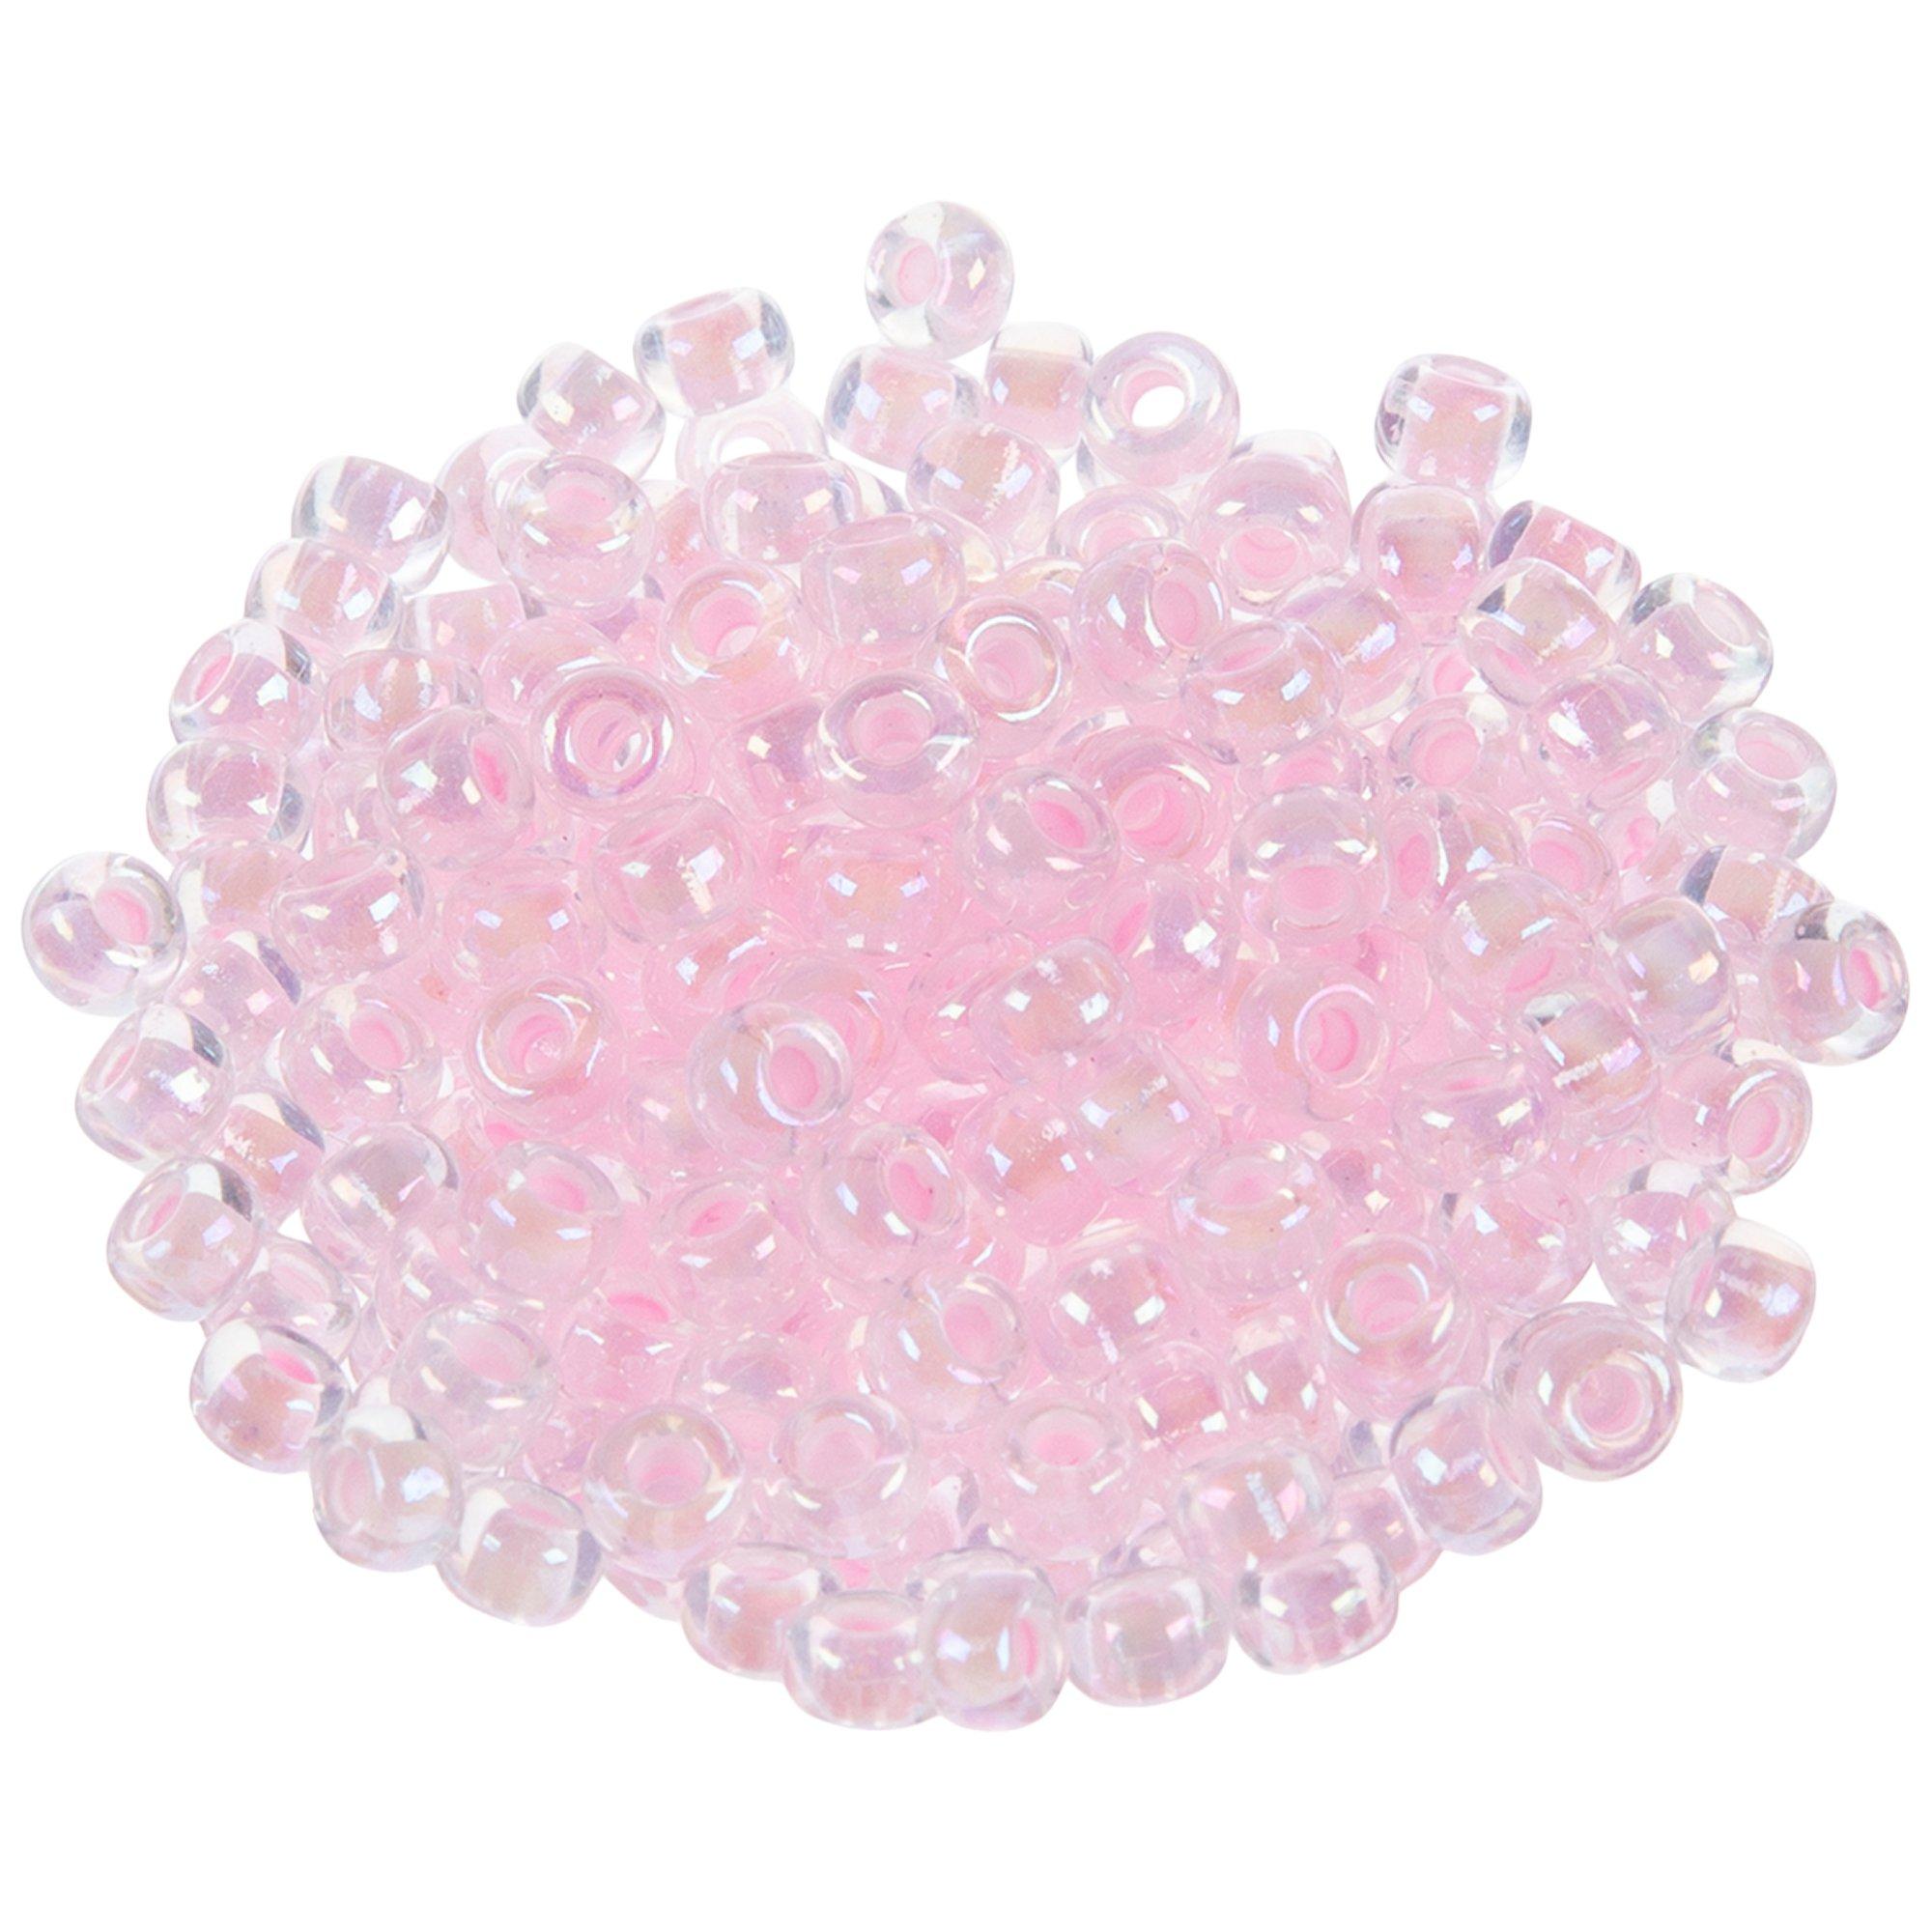 Opaque Multi-Color Glass Seed Beads - 8/0, Hobby Lobby